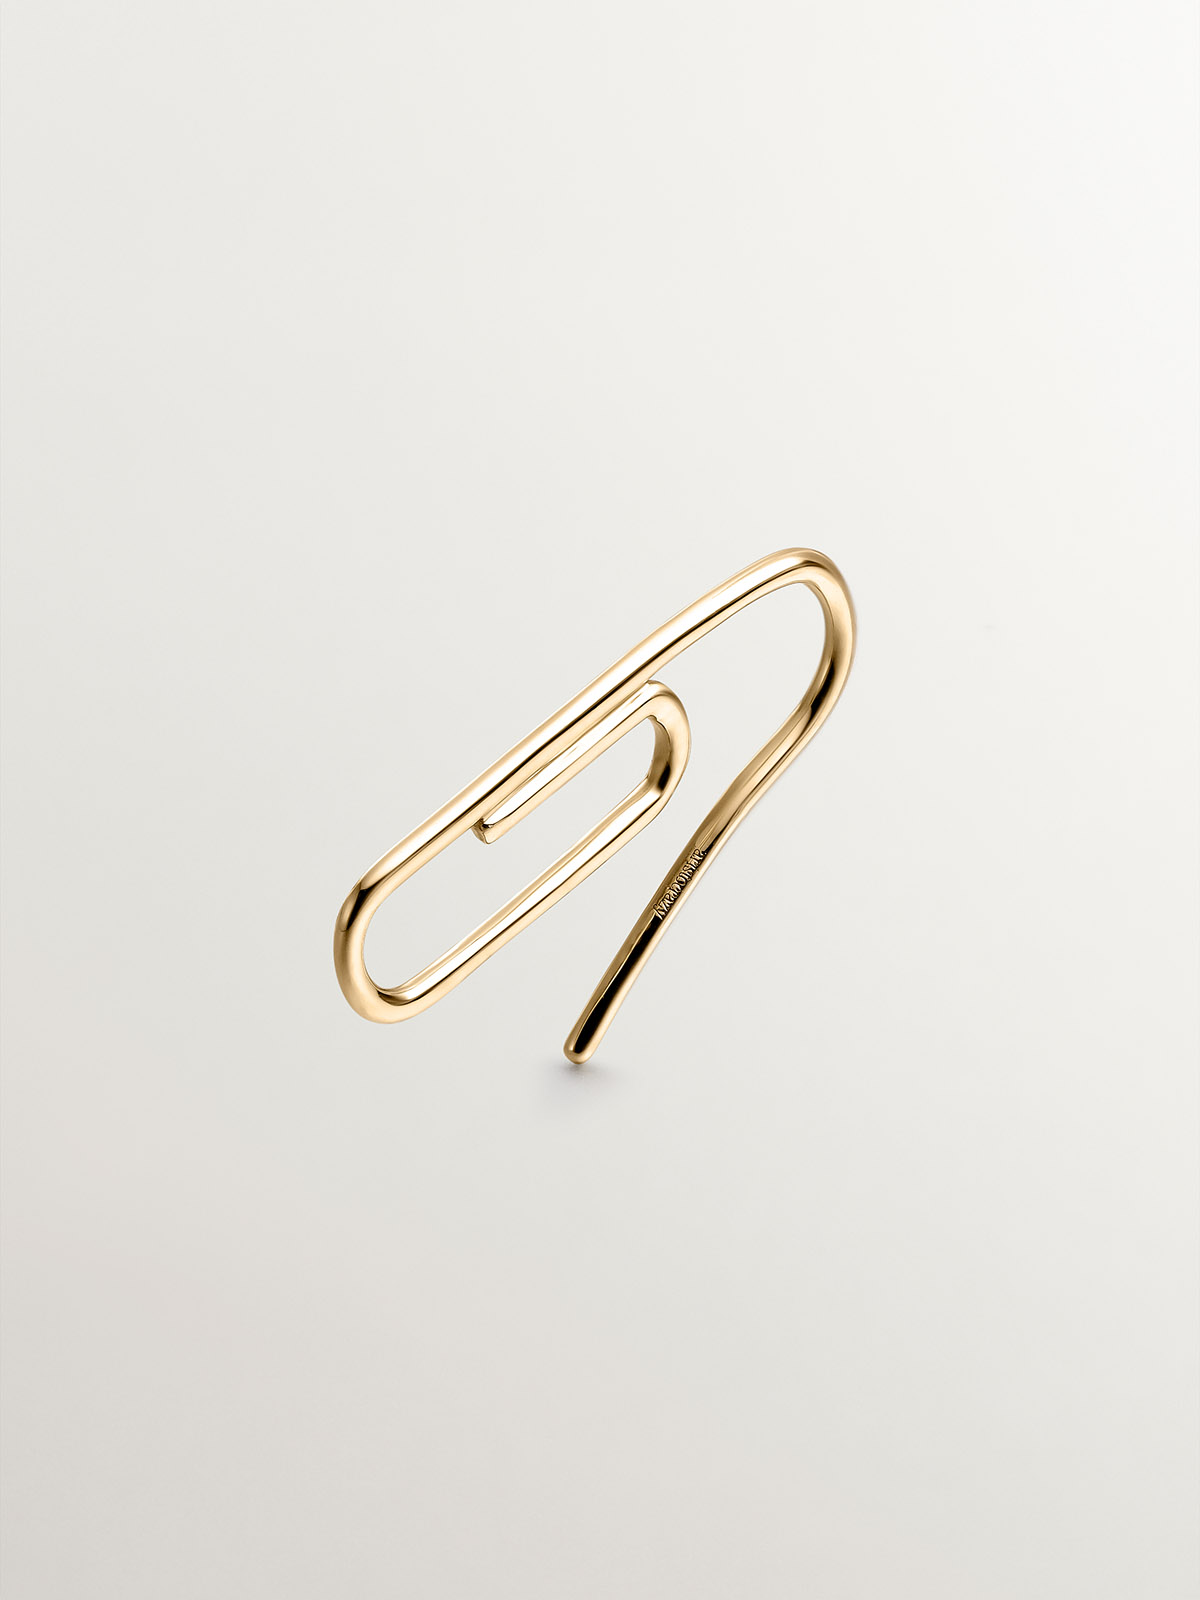 Individual 9K yellow gold earring in the shape of a clip.